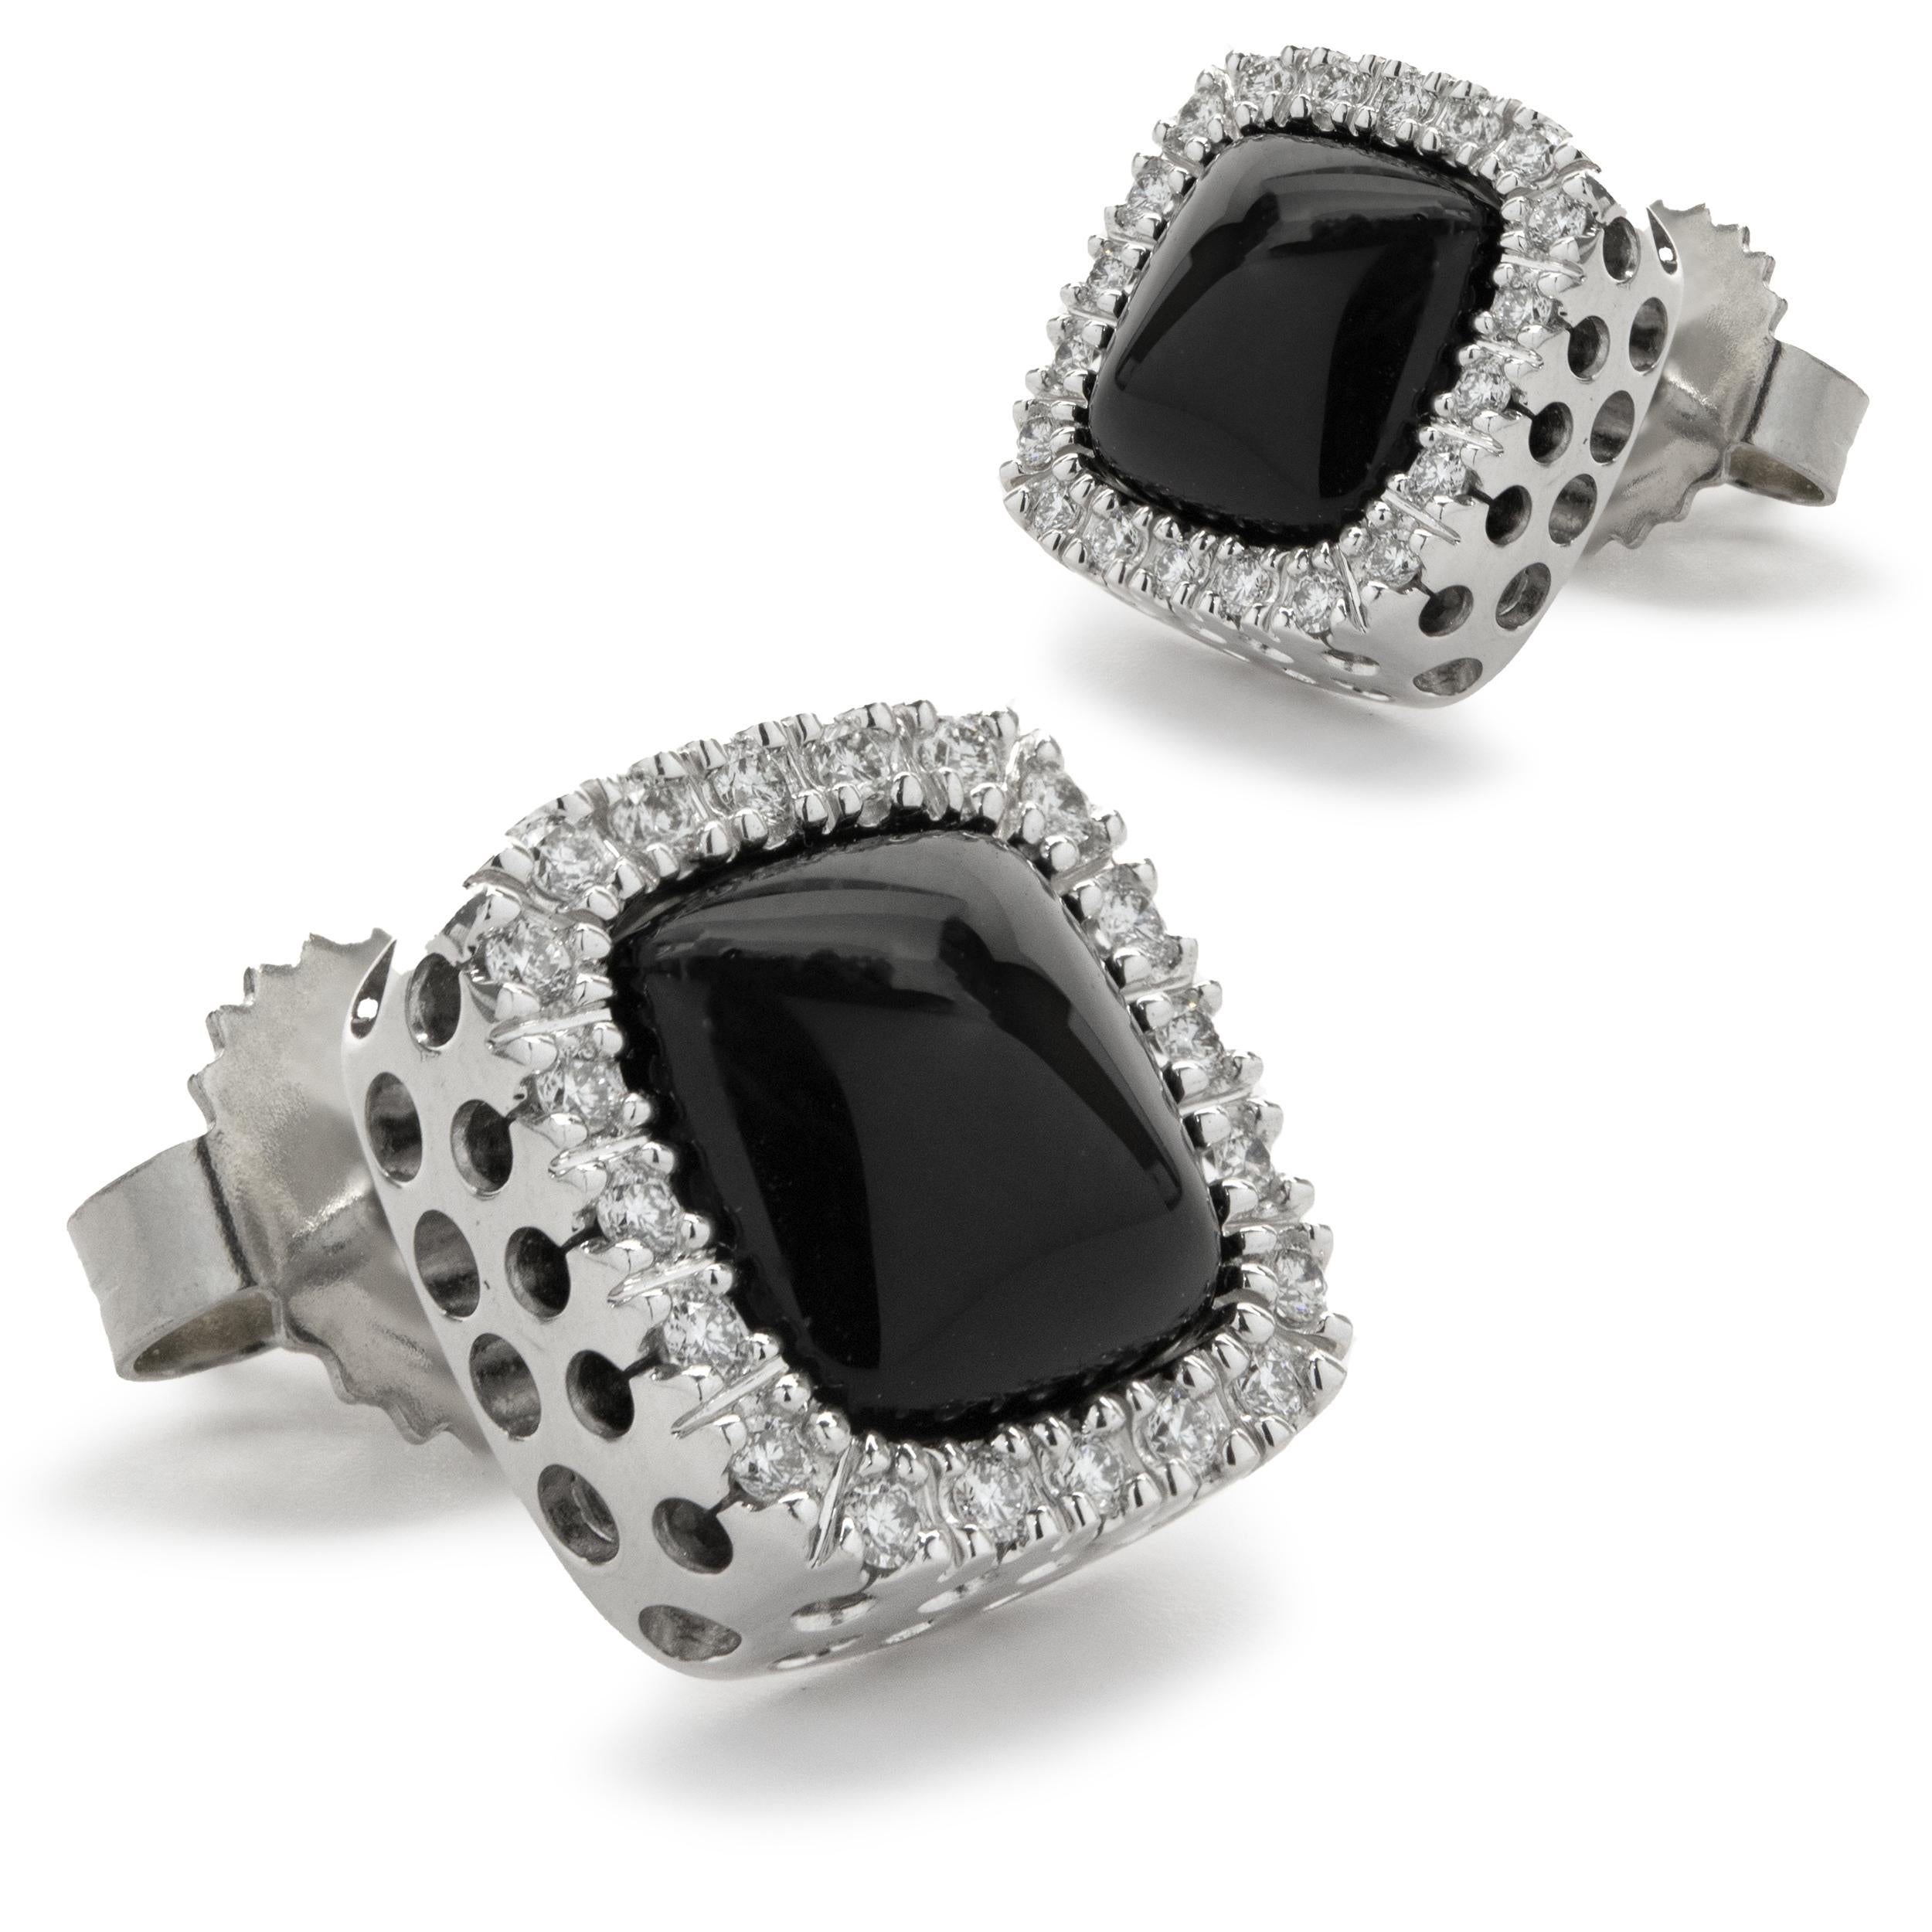 Designer: custom
Material: 14K white gold
Diamond: 44 round brilliant cut = 0.50cttw
Color: G
Clarity: VS2
Dimensions: earrings measure 10 X 10mm
Fastenings: posts with friction backs
Weight: 4.28 grams
